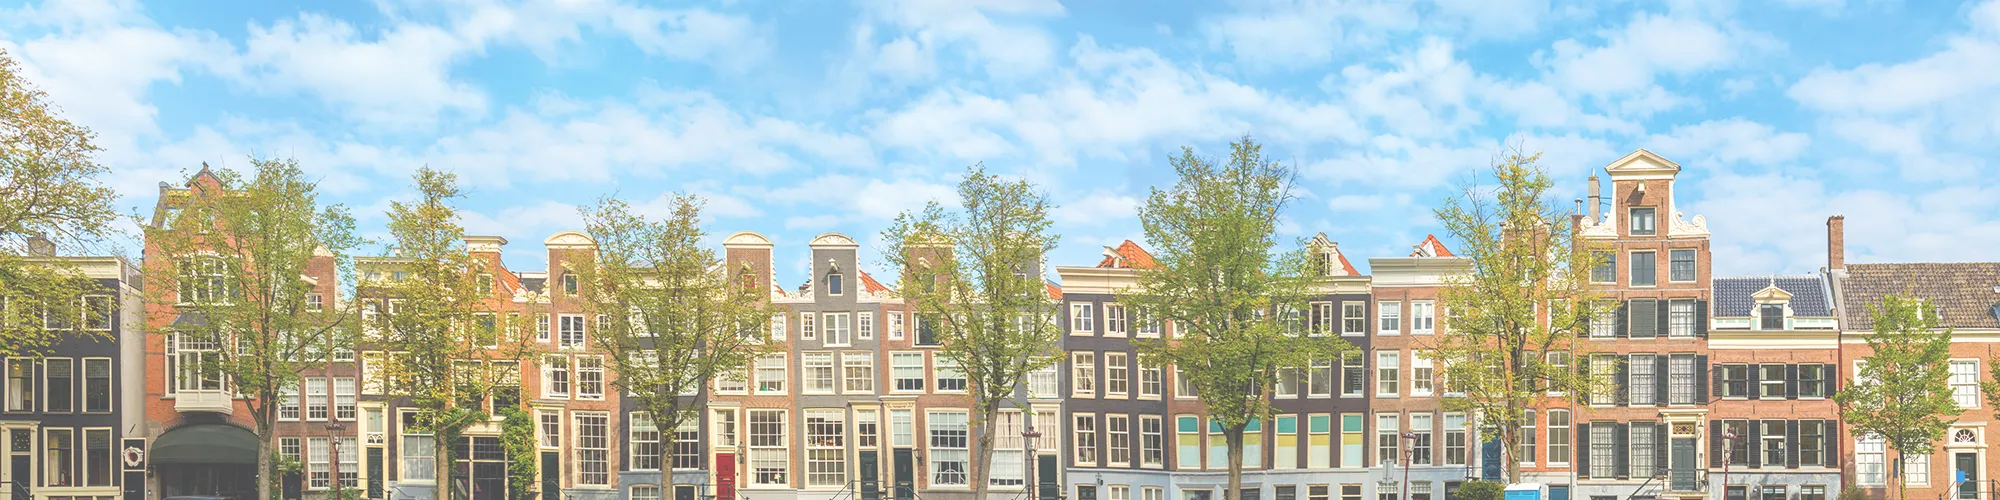 background image of row houses and blue sky